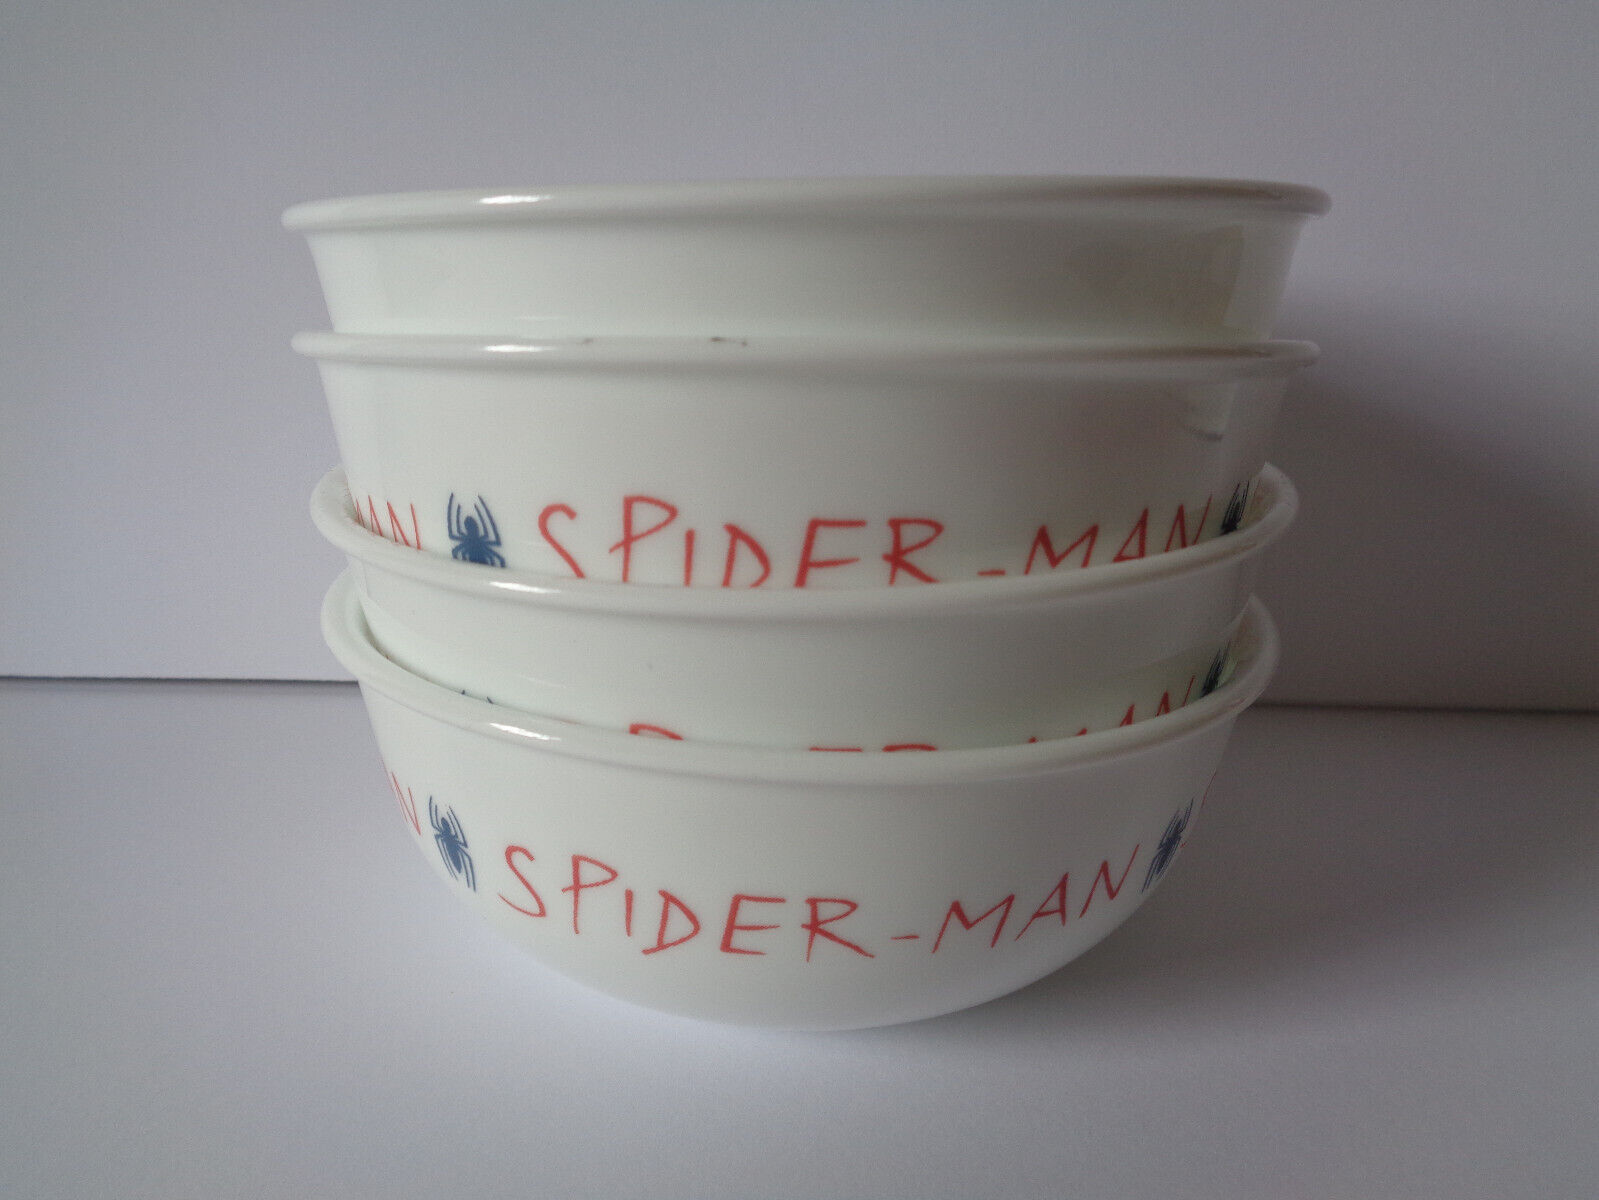 4 Corelle Marvel Spider-Man Cereal Bowls 16-ounce New Made in USA Corelle